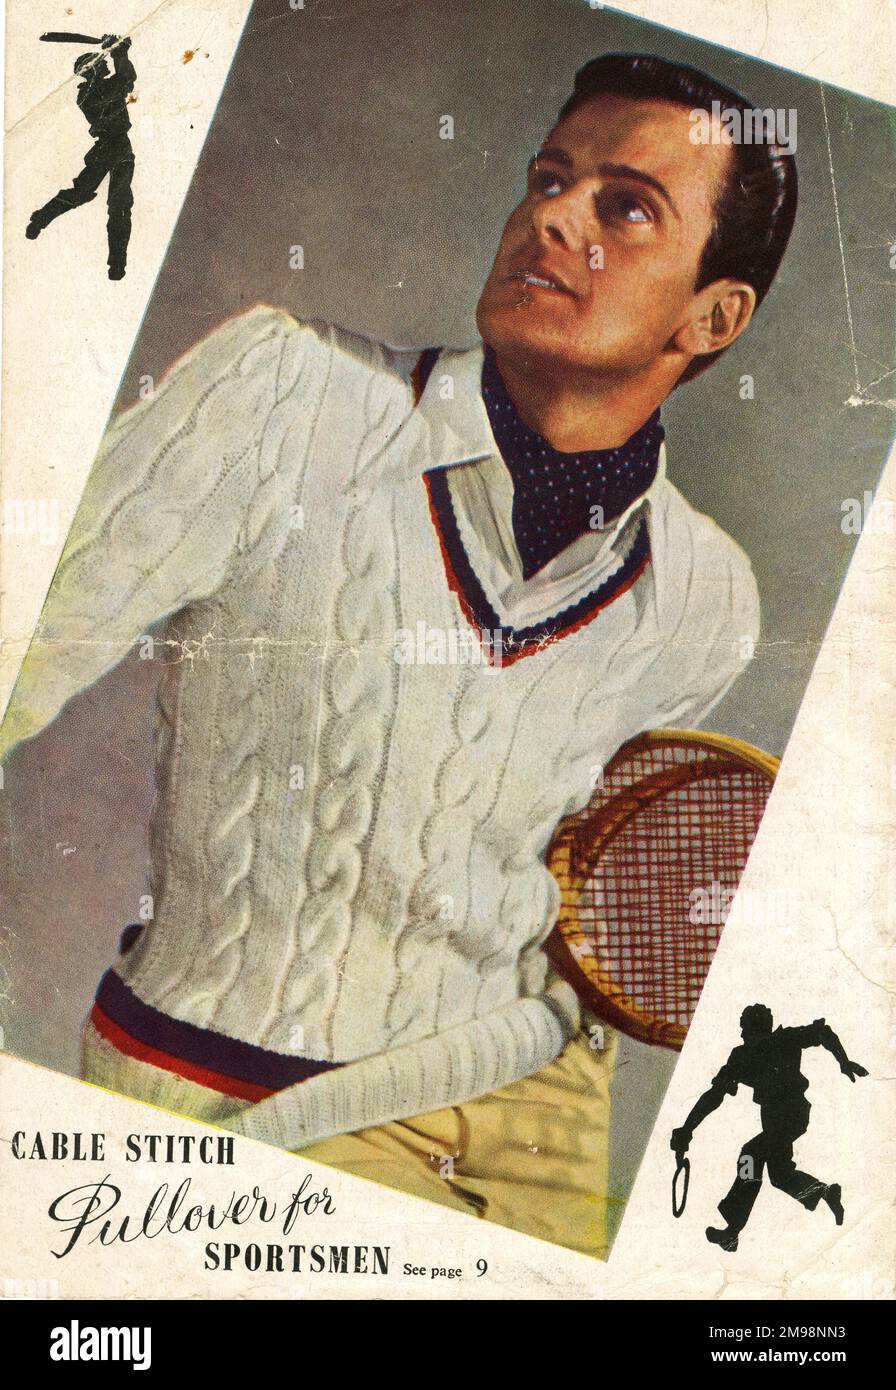 Knitting pattern cover, Men's Tennis Pullover in cable stitch. Stock Photo